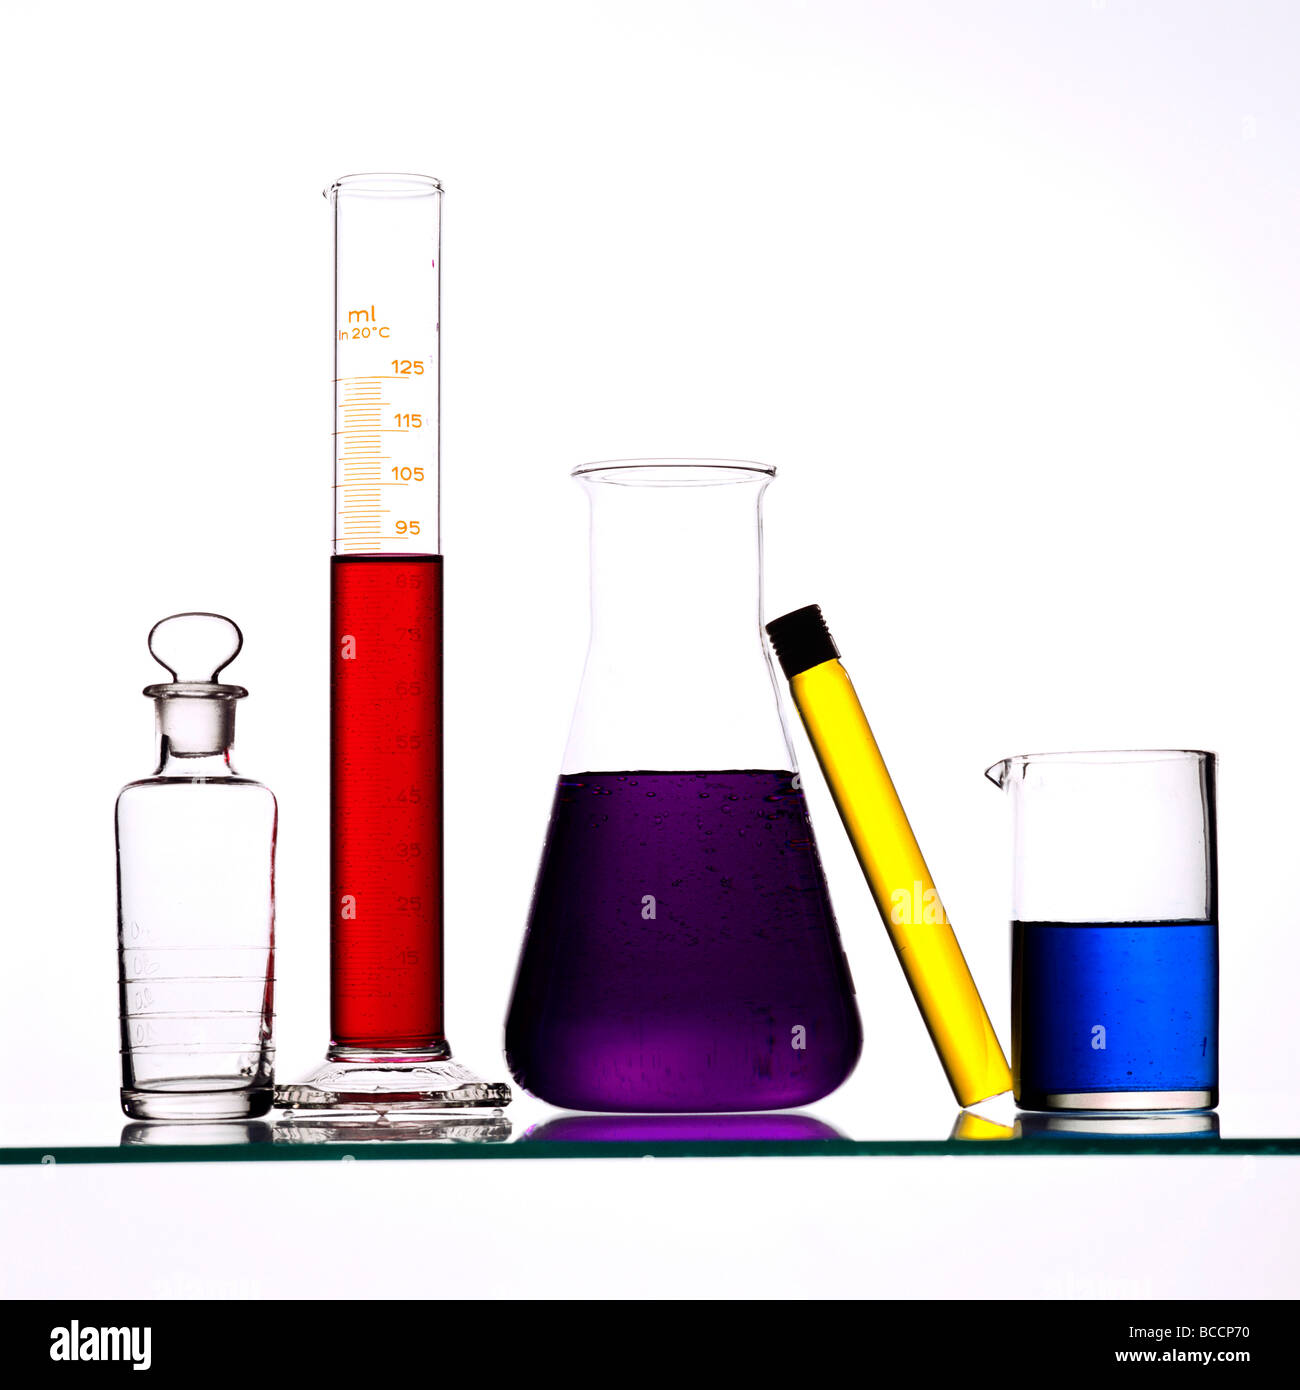 Science lab equipment / test tubes Stock Photo